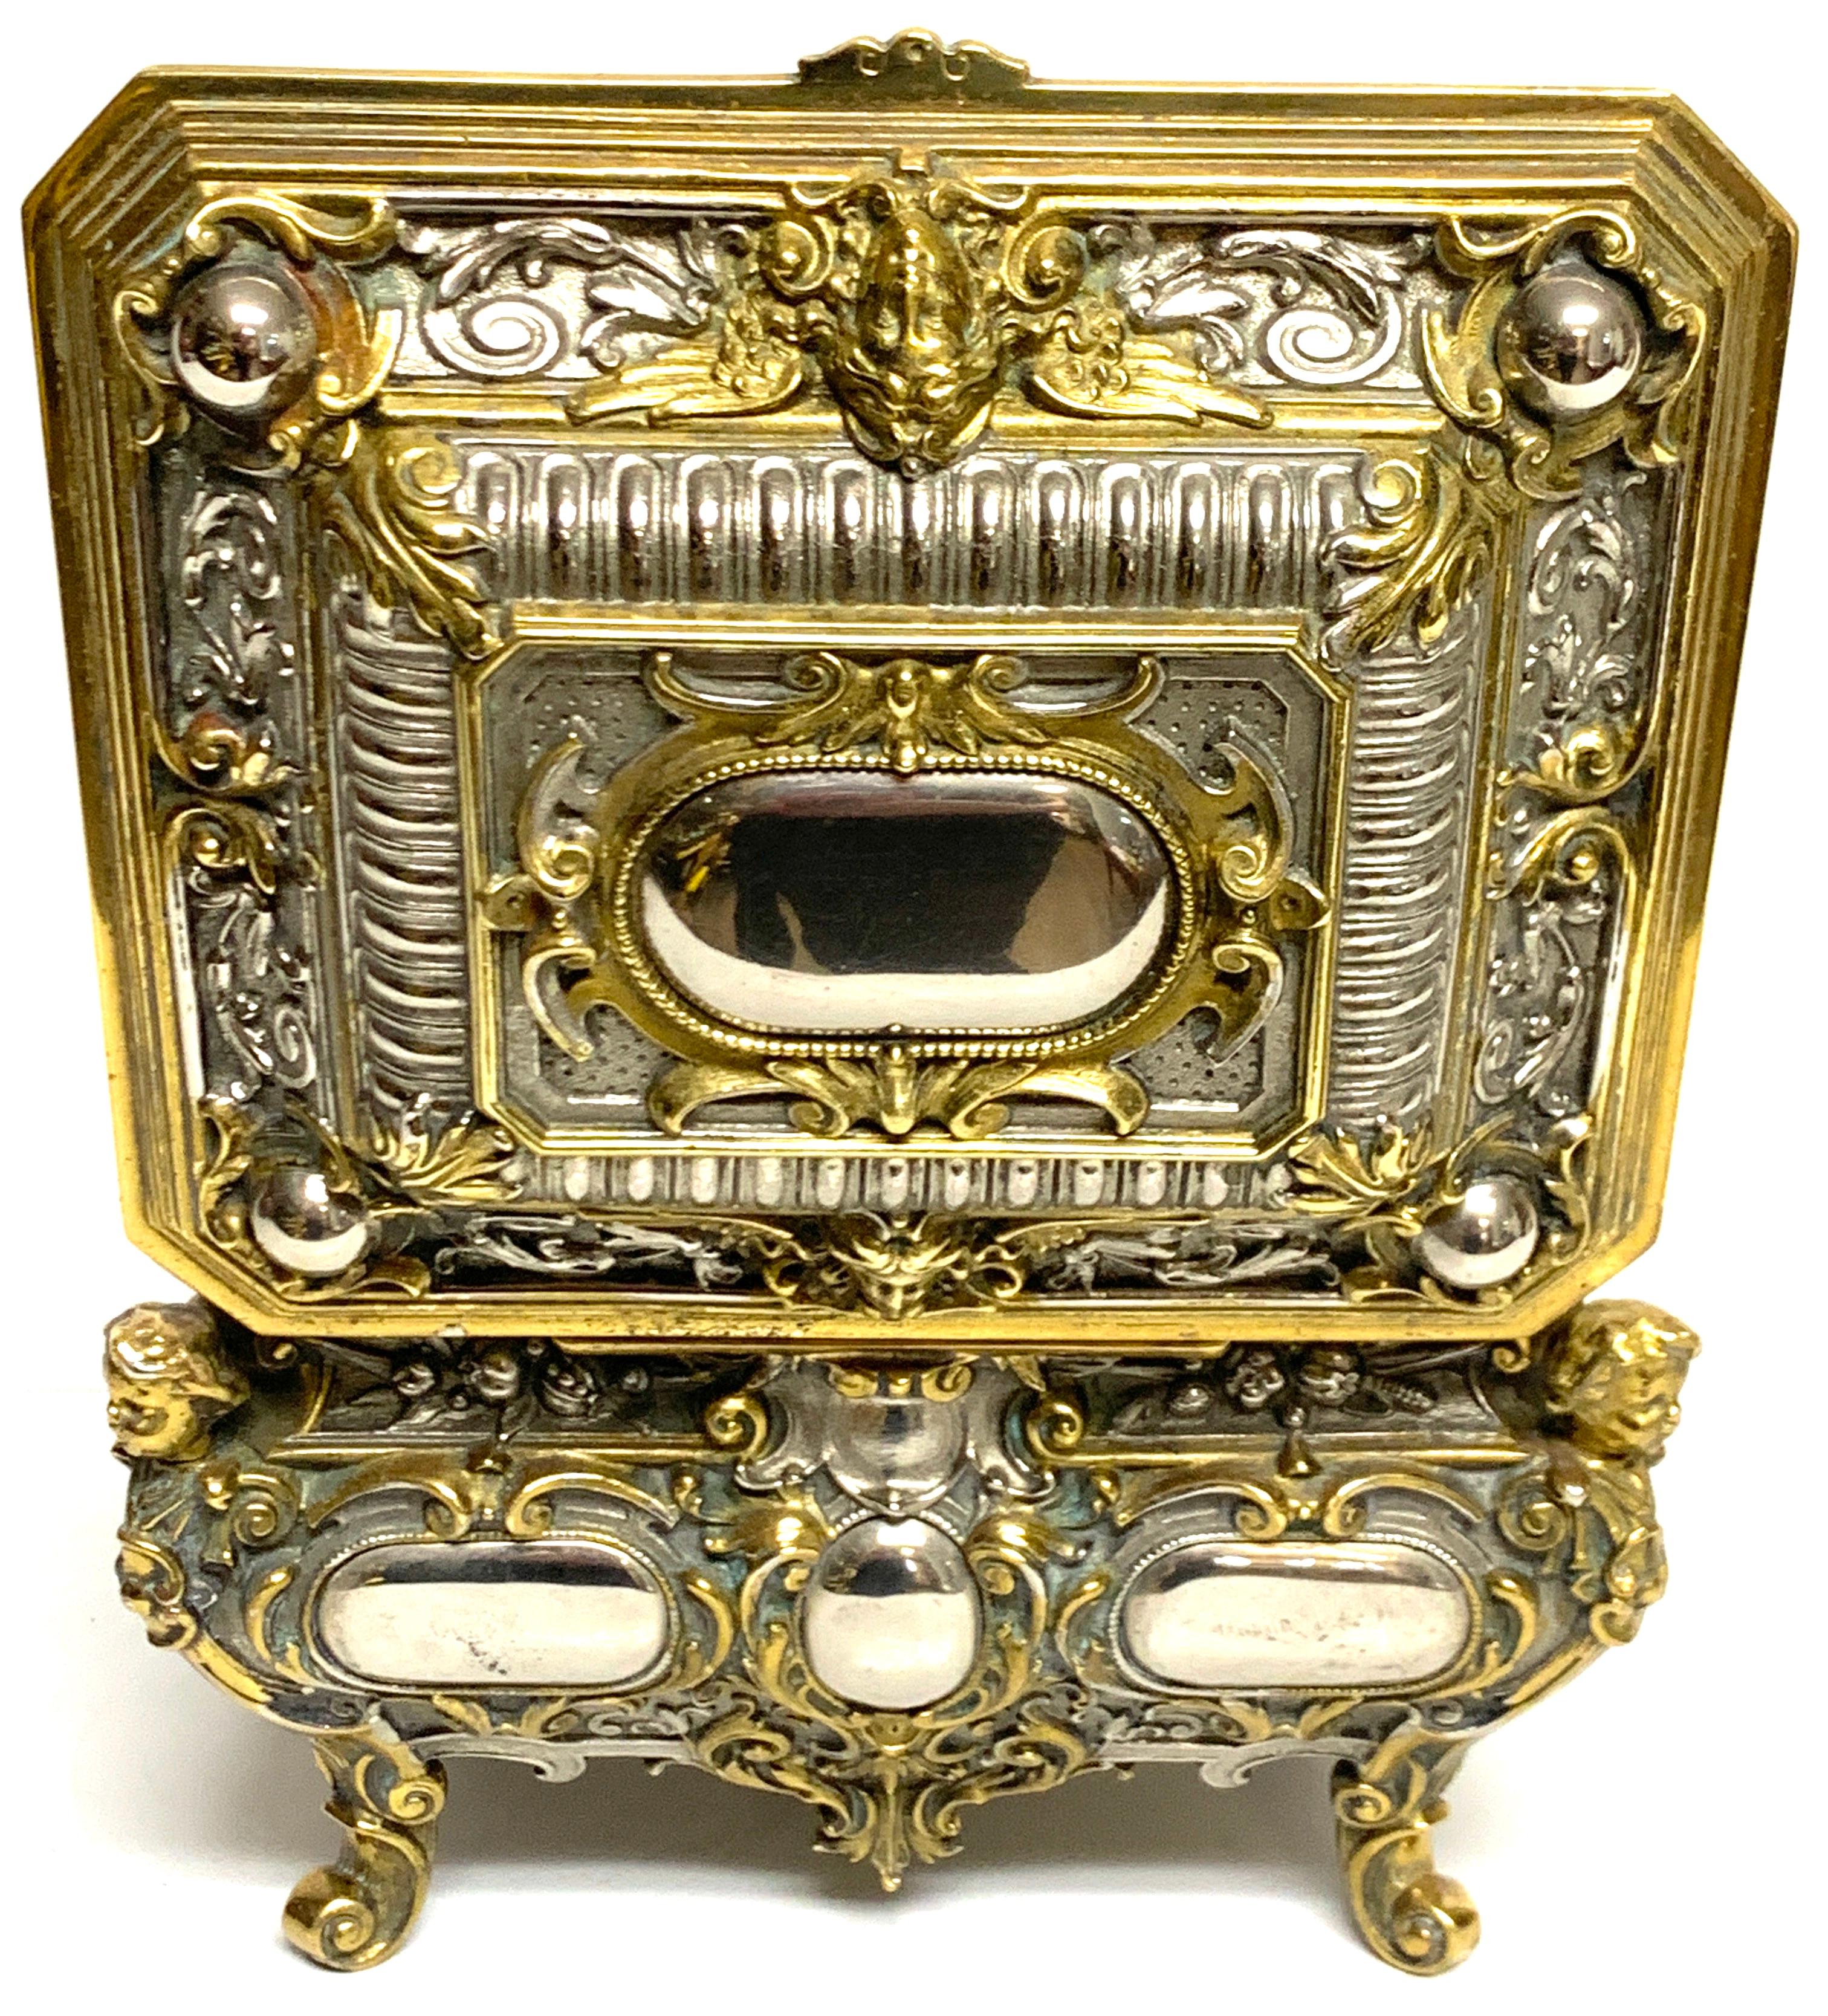 Magnificent Silvered Bronze and Ormolu Jewelry/Table Box For Sale 4